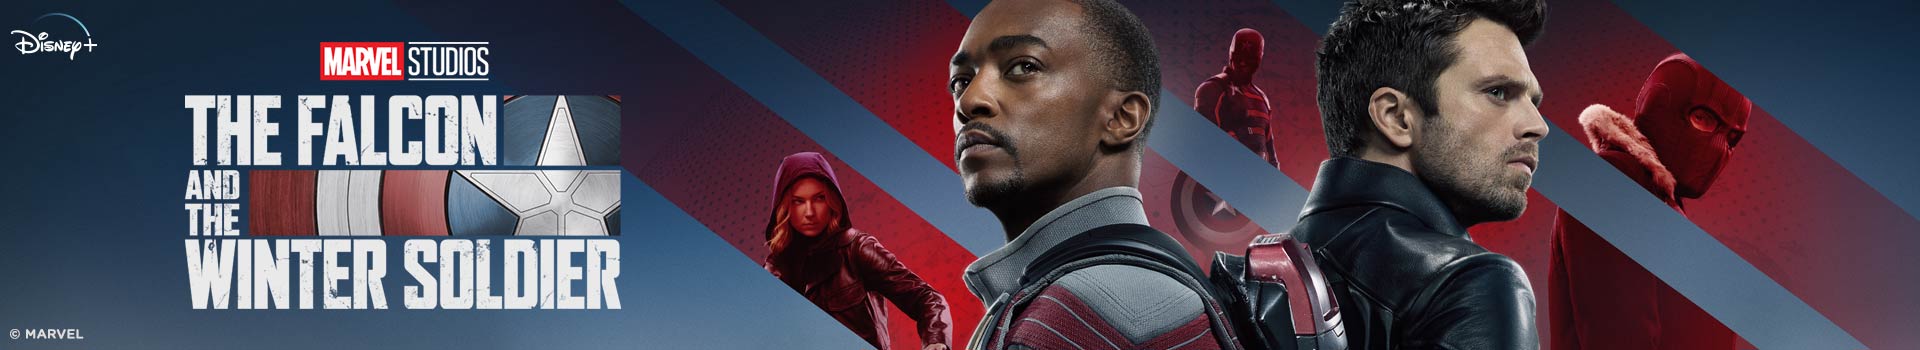 The Falcon And The Winter Soldier - Official Merchandise